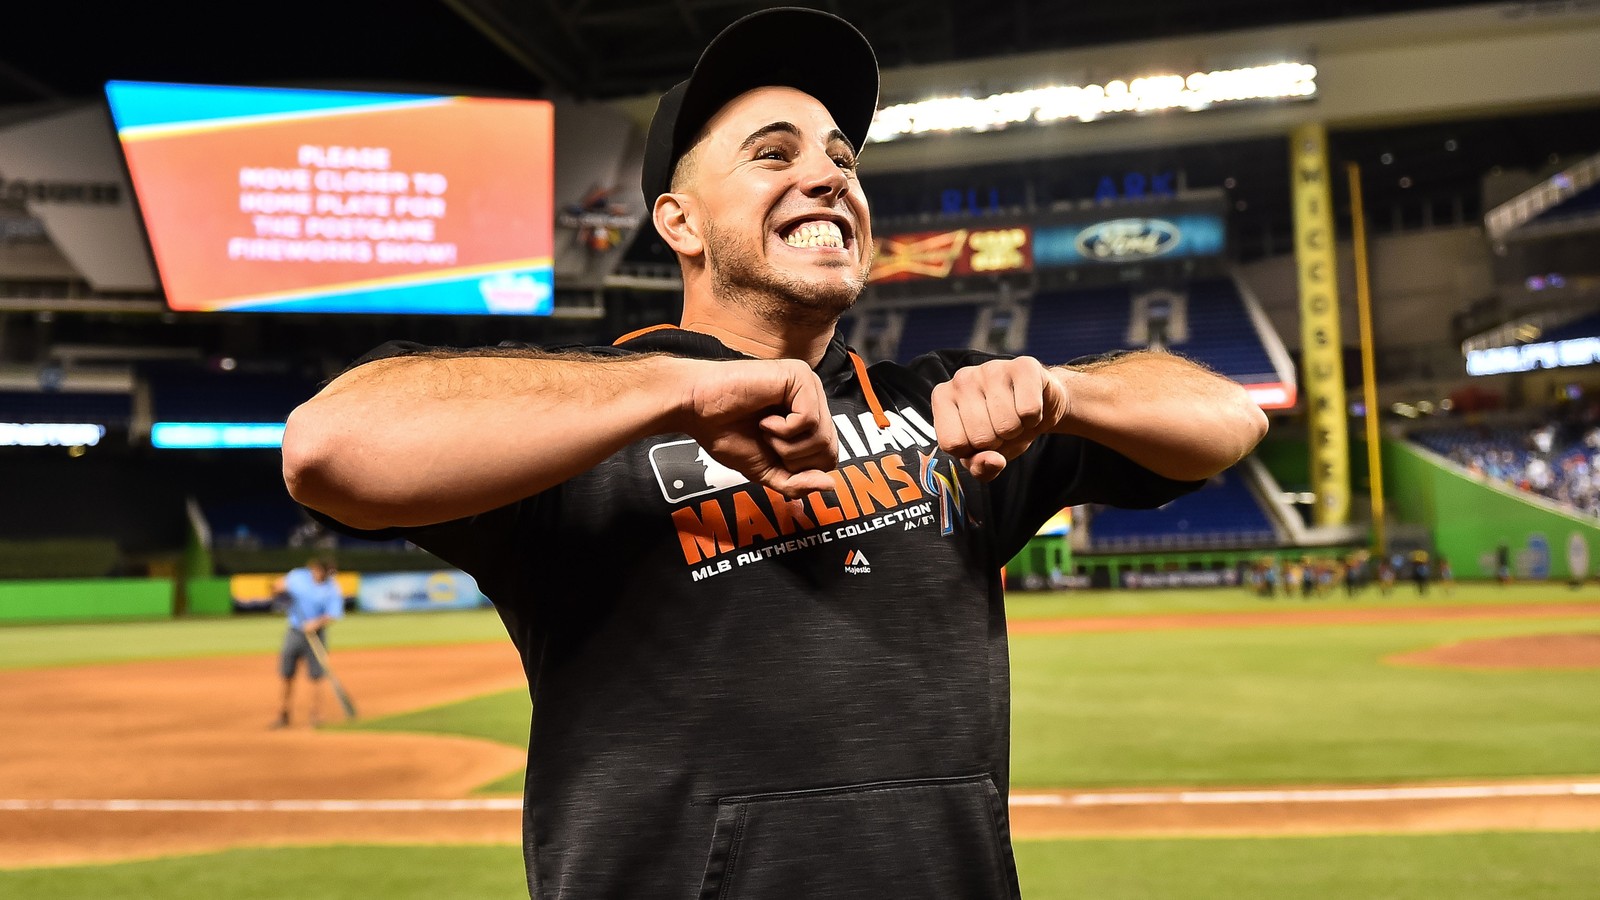 Marlins Pitcher Jose Fernandez Dies in Boating Accident - The Atlantic